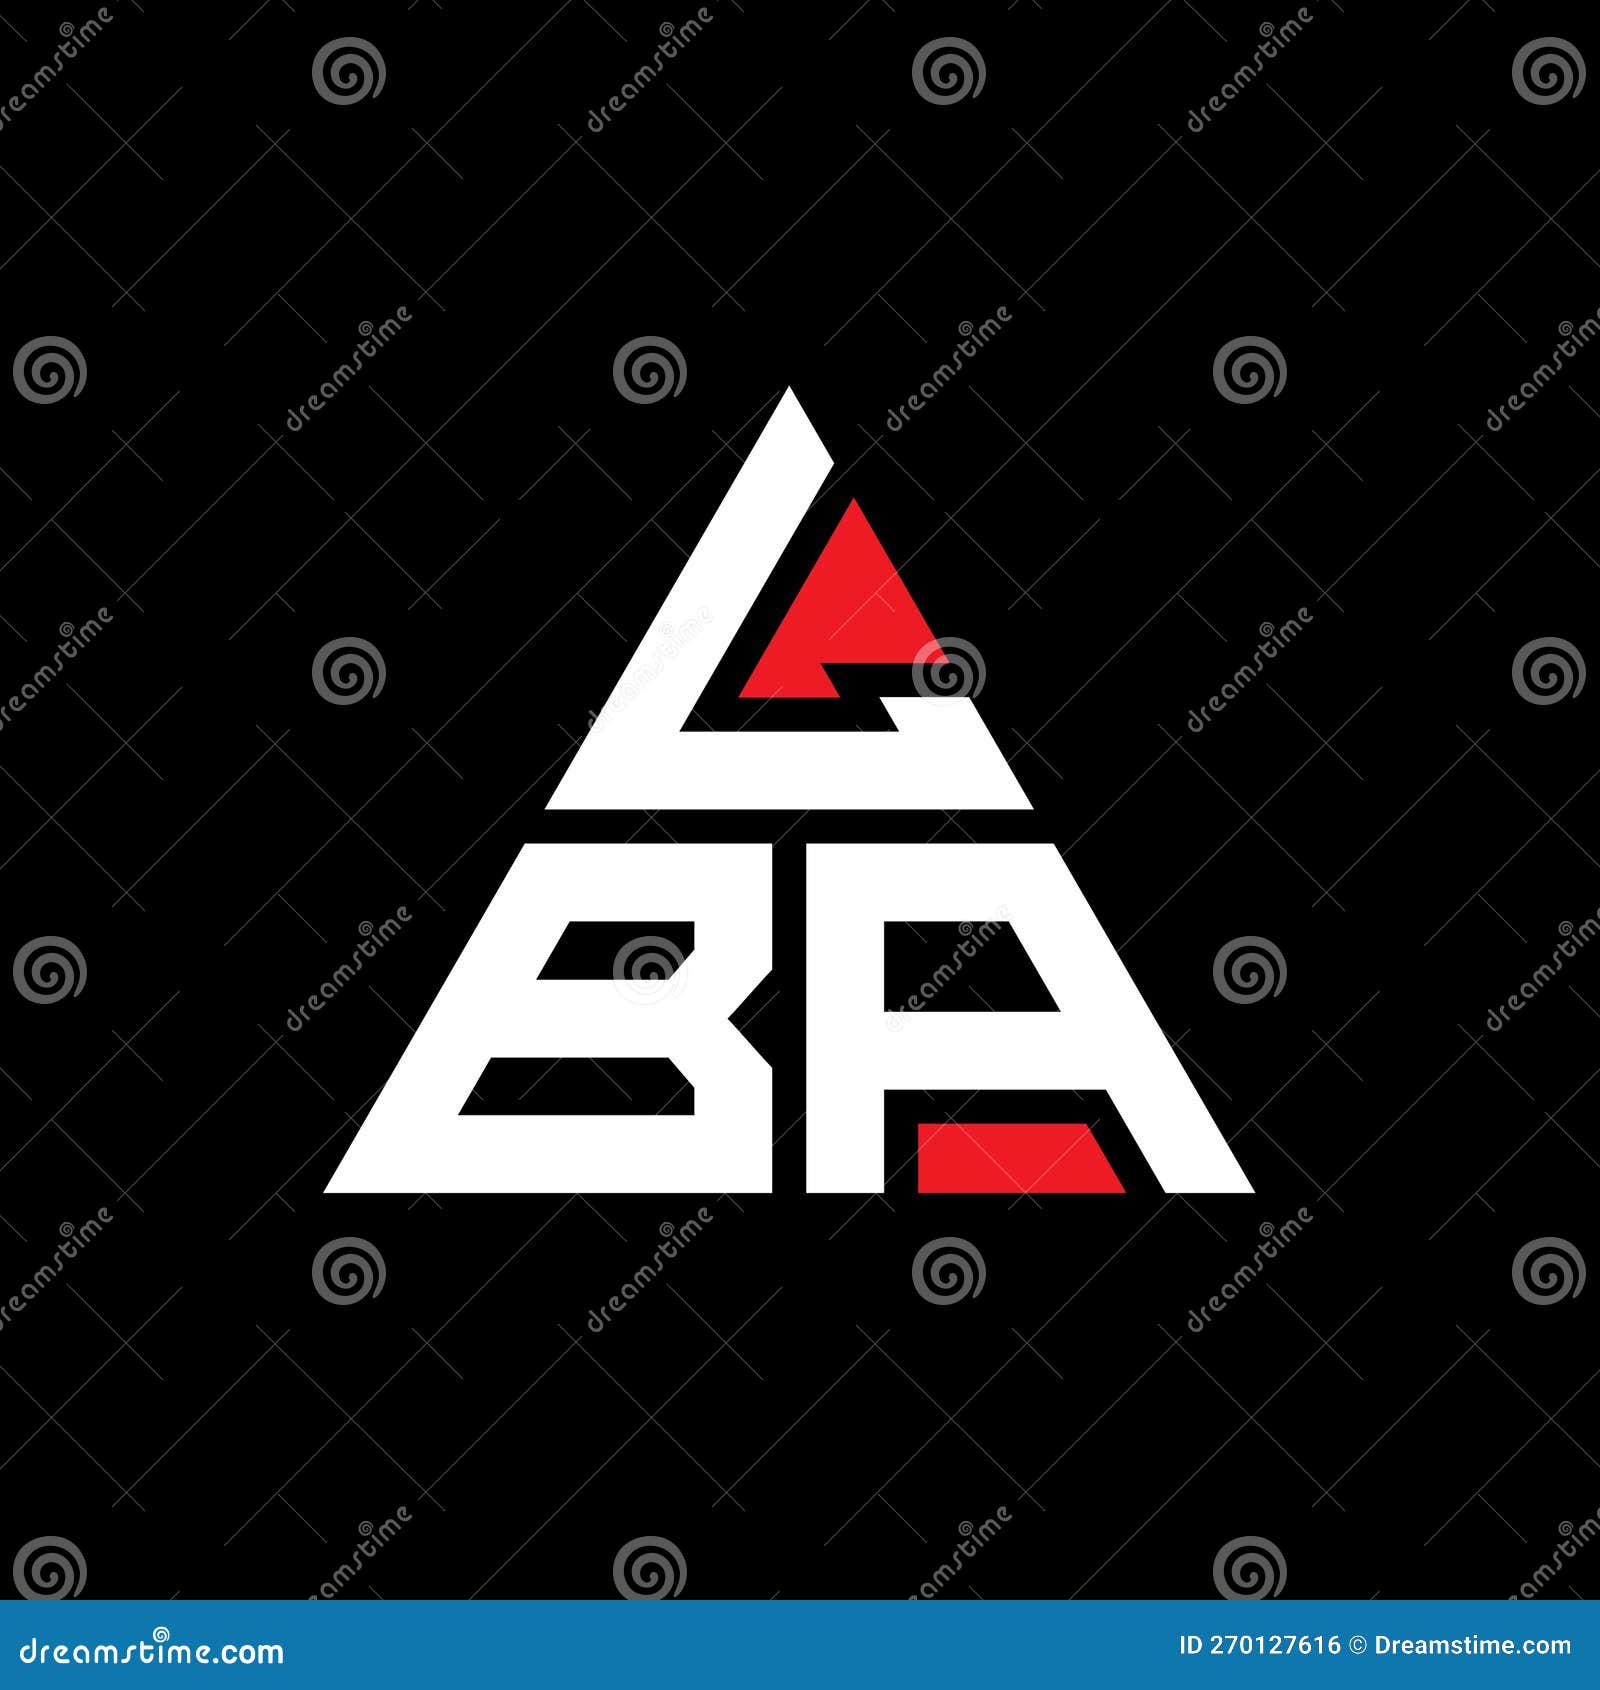 lba triangle letter logo  with triangle . lba triangle logo  monogram. lba triangle  logo template with red